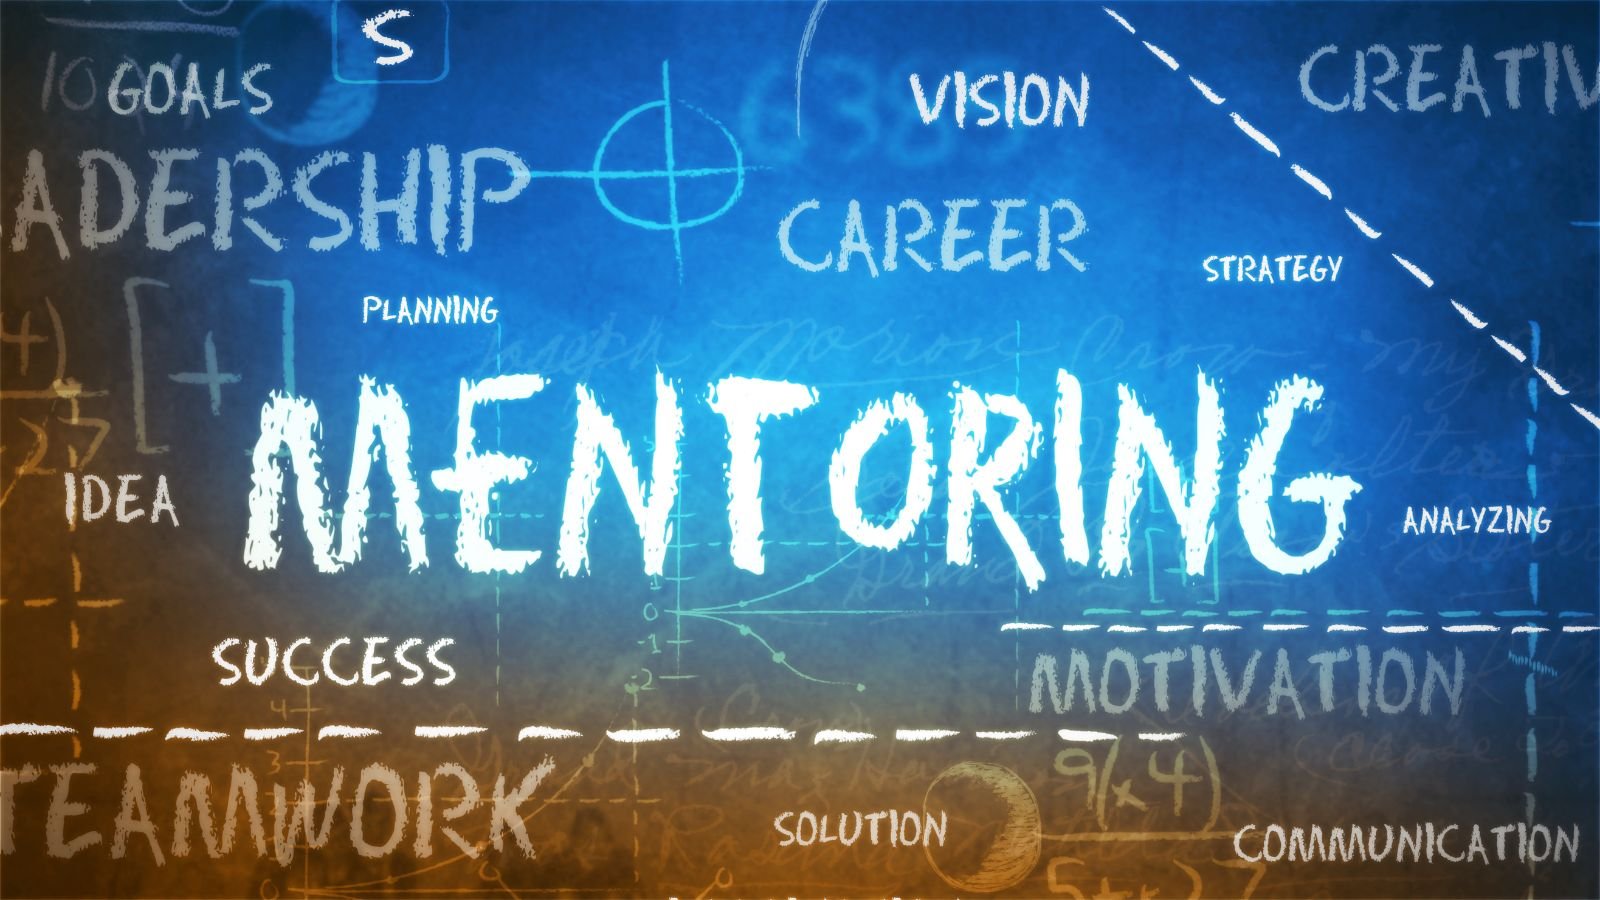 Boost performance with Informal Mentoring